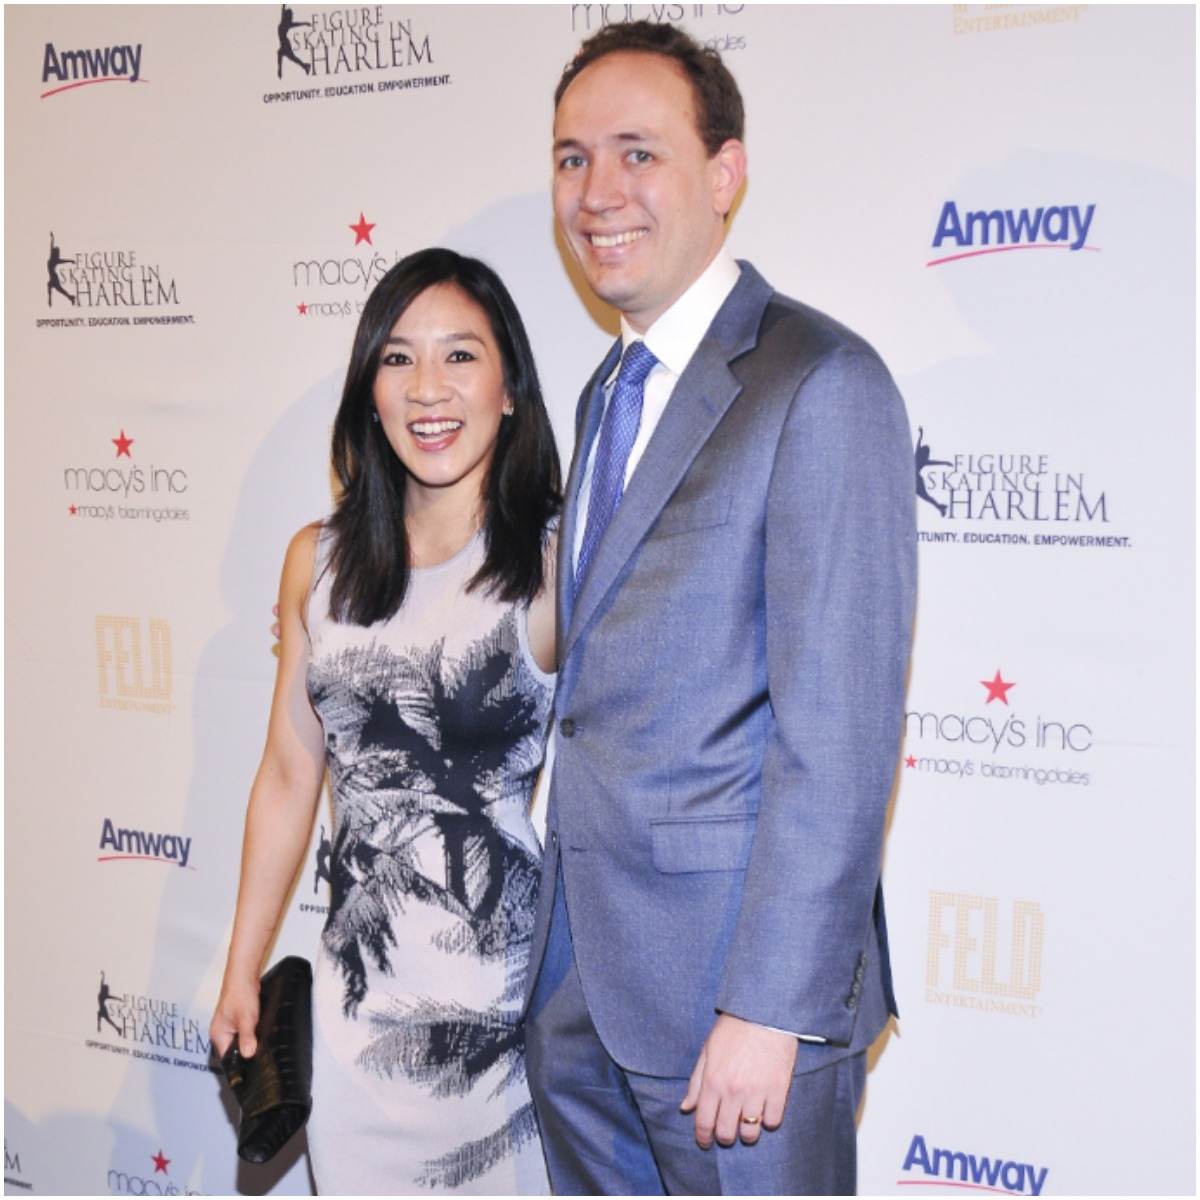 Clay Pell and his wife Michelle Kwan